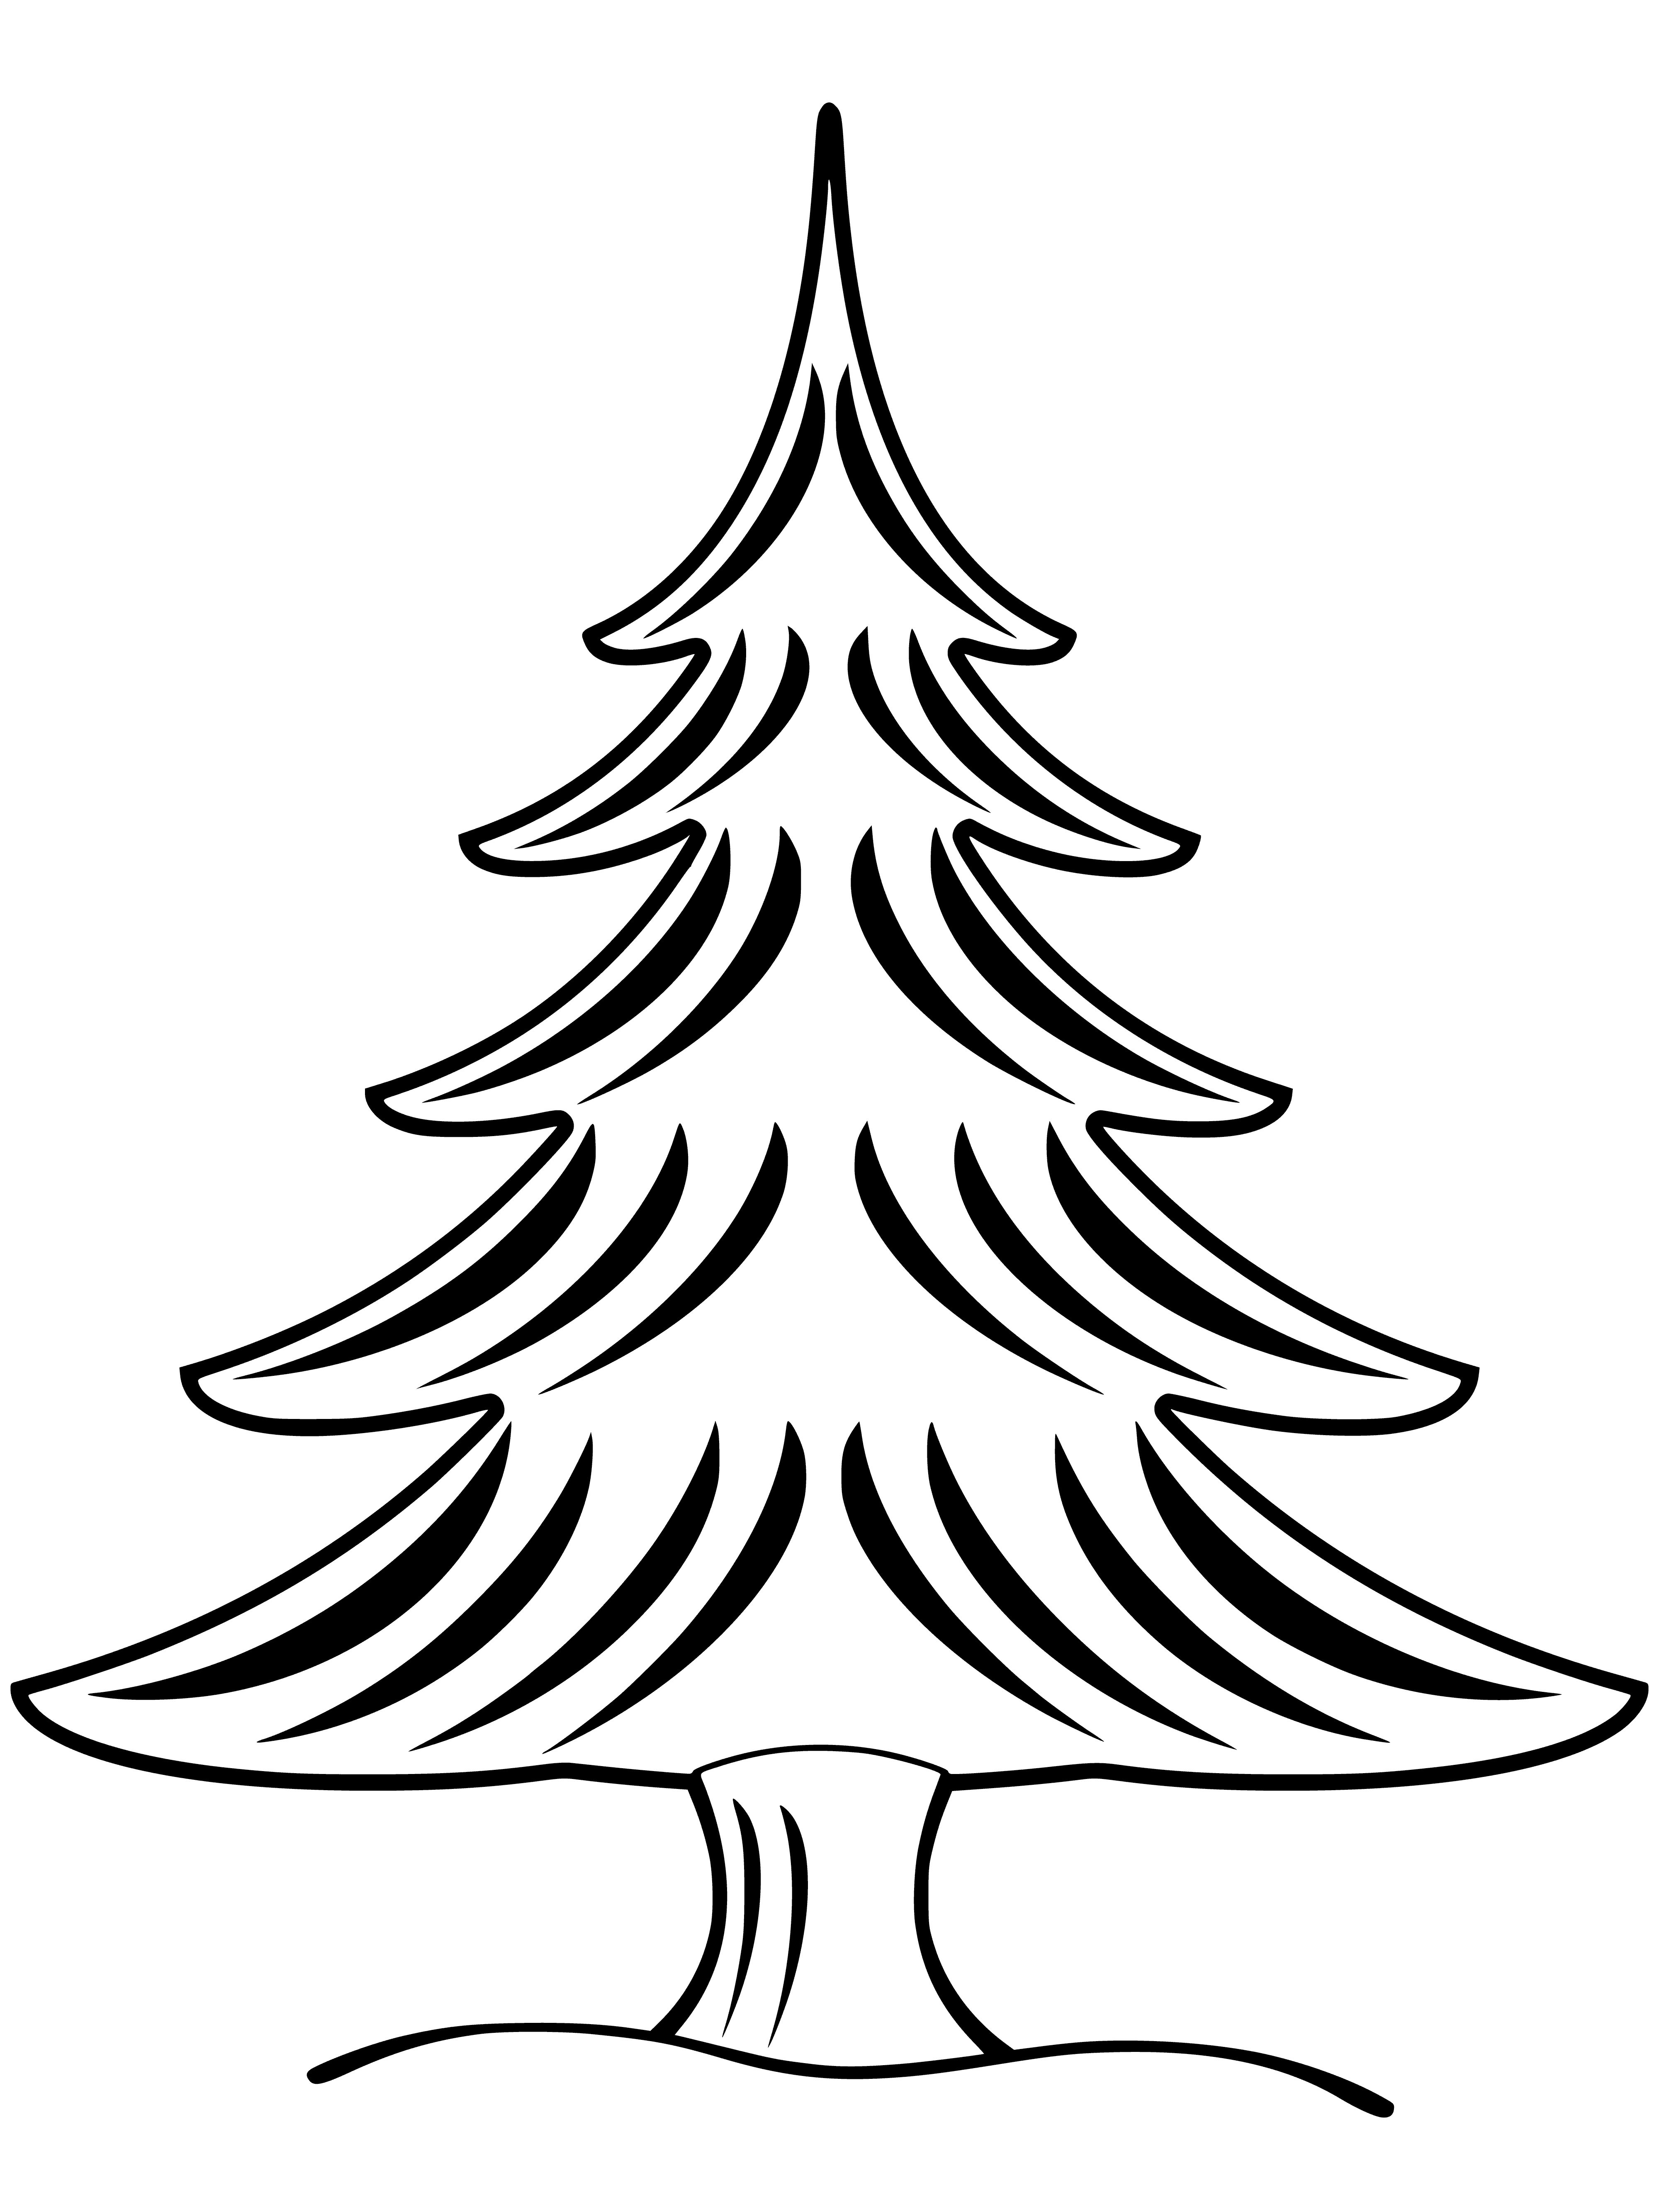 coloring page: Christmas tree adorned w/ star on top, garland on middle, & presents underneath.